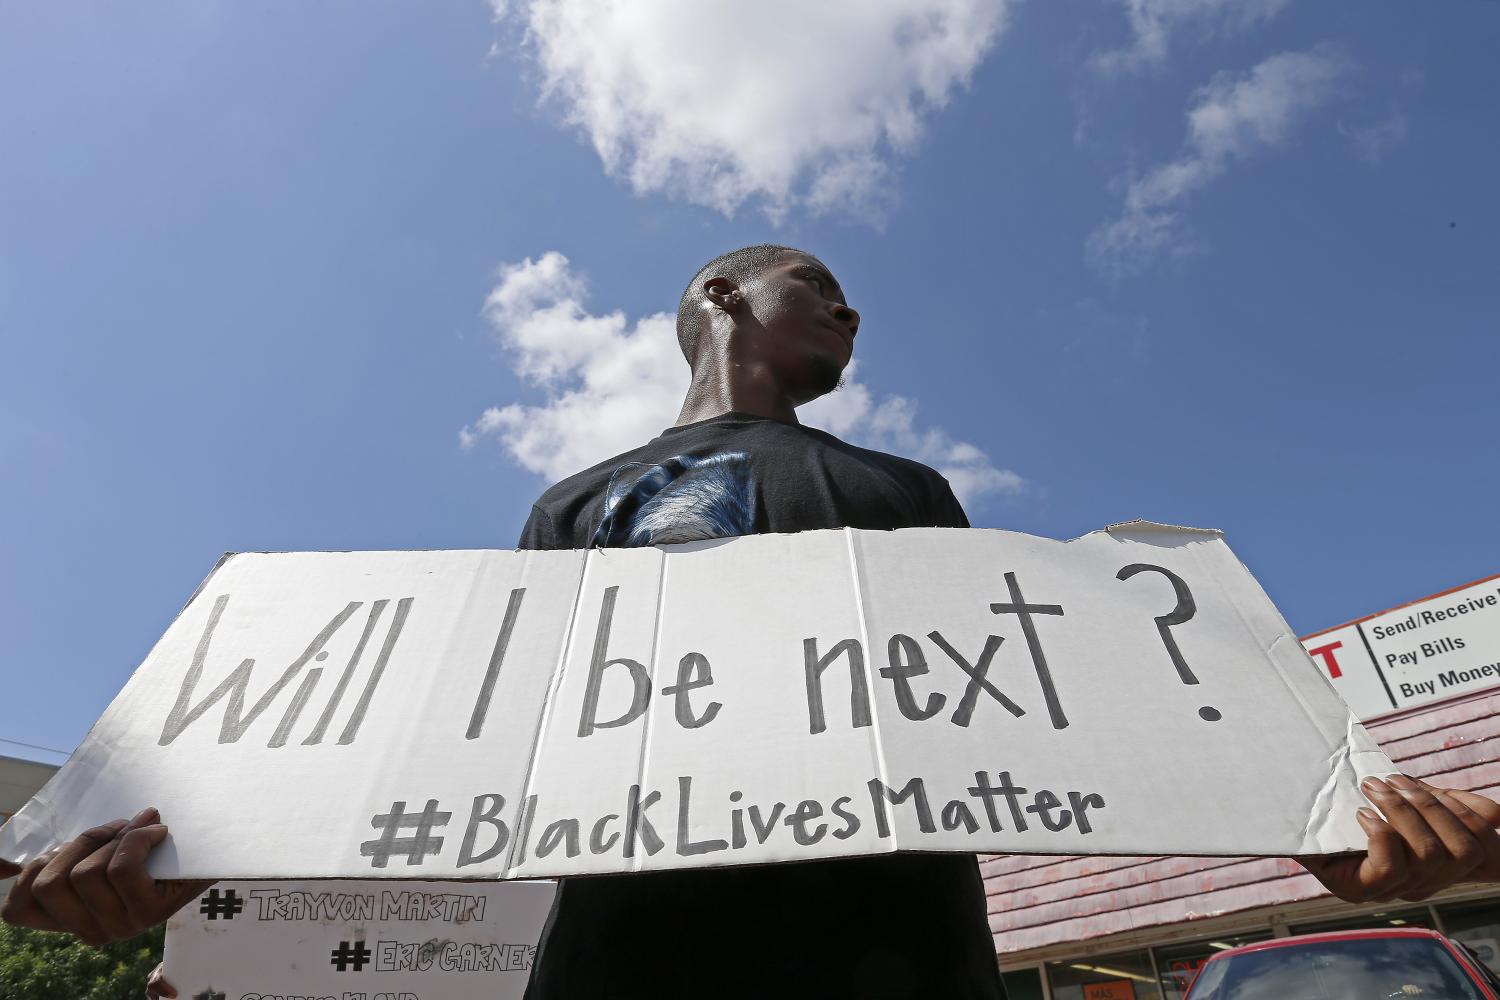 Black lives and their minds matter, and that is not up for debate